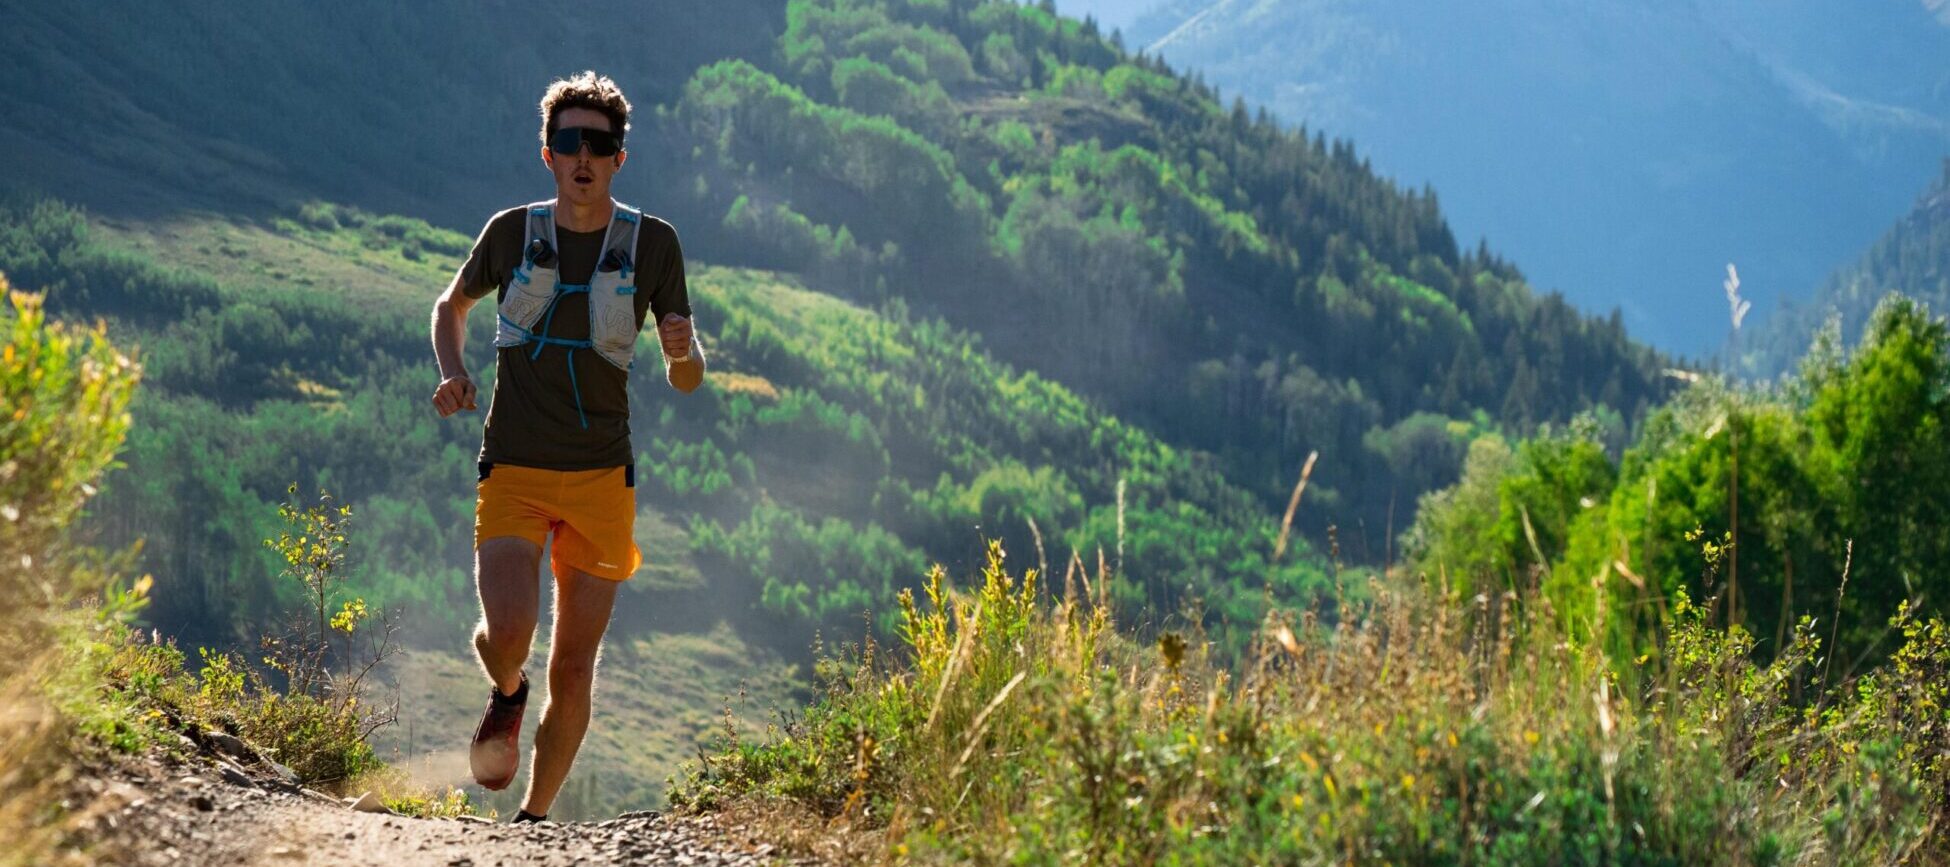 Trail Running 101: How to Trail Run Safely, BLISTER